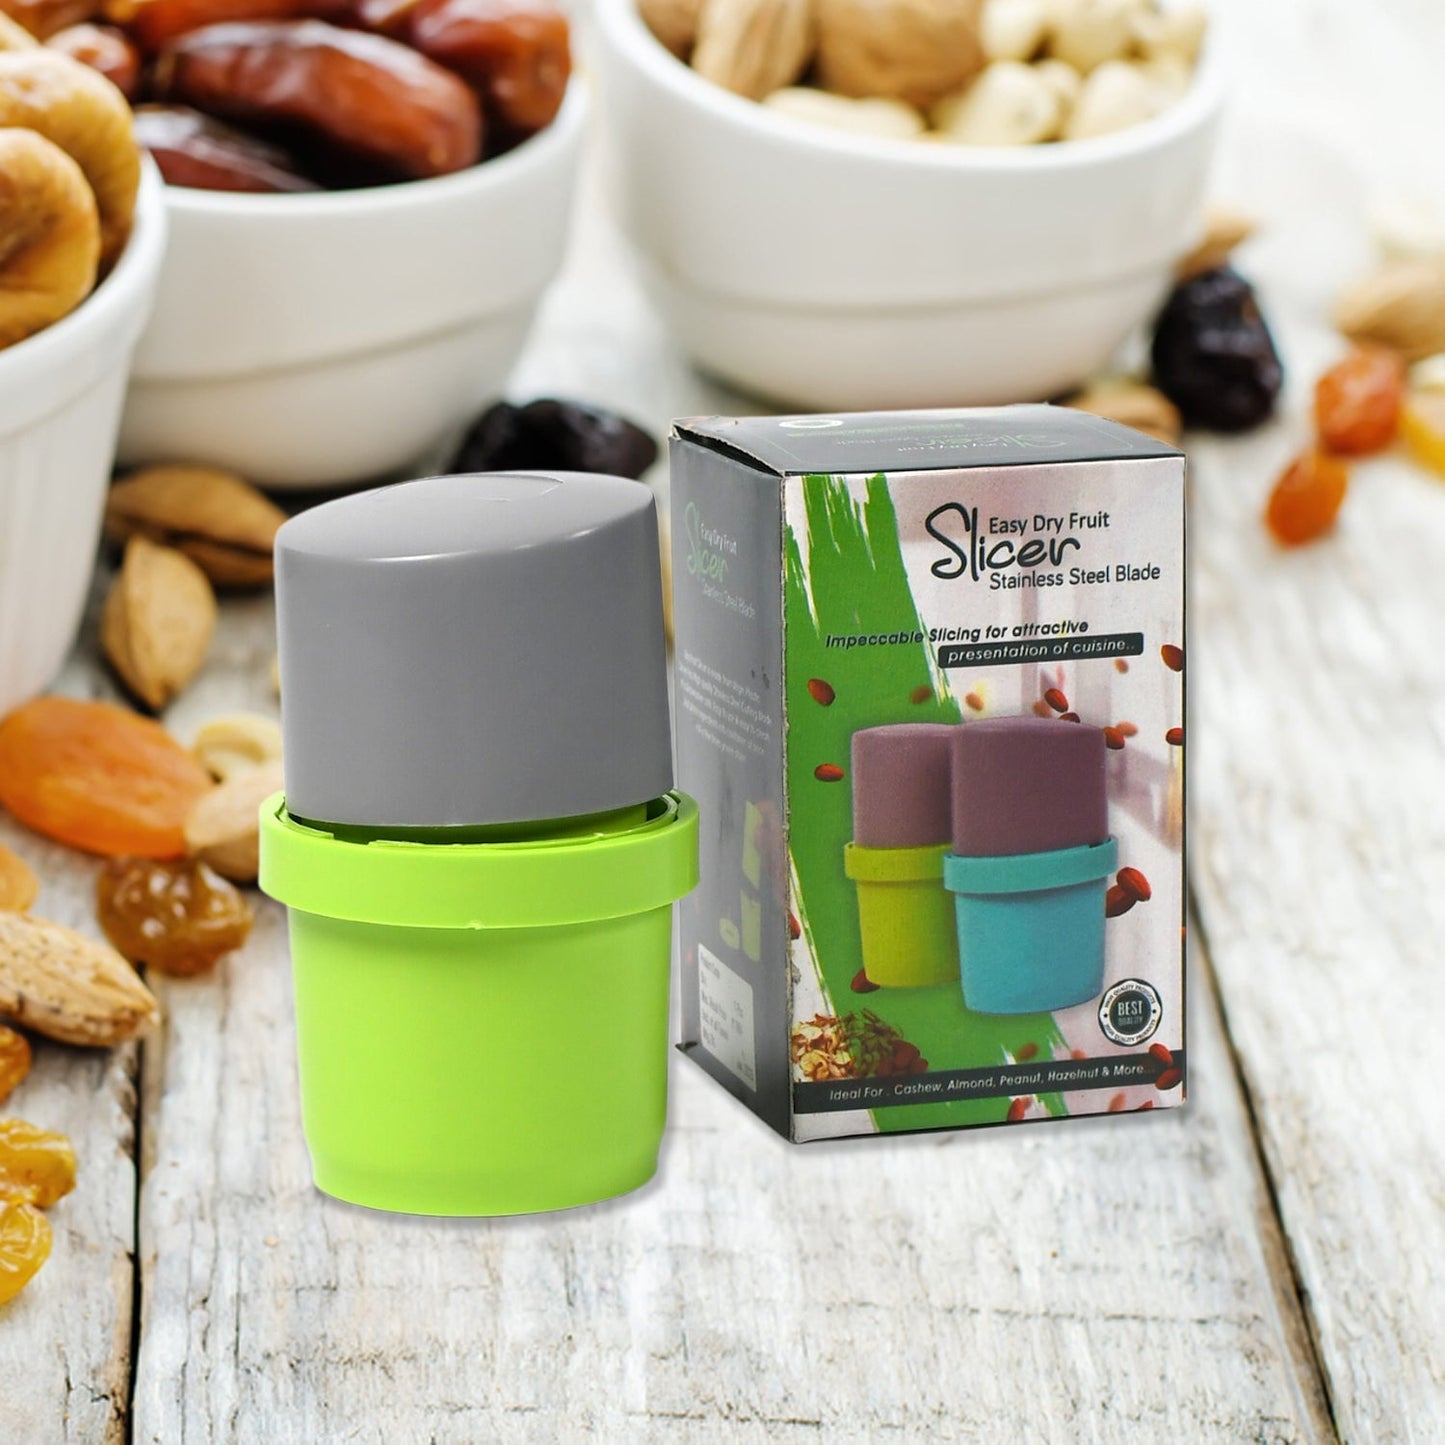 5333 Plastic Dry Fruit and Paper Mill Grinder Slicer, Chocolate Cutter and Butter Slicer with 3 in 1 Blade, Standard, Multicolor DeoDap